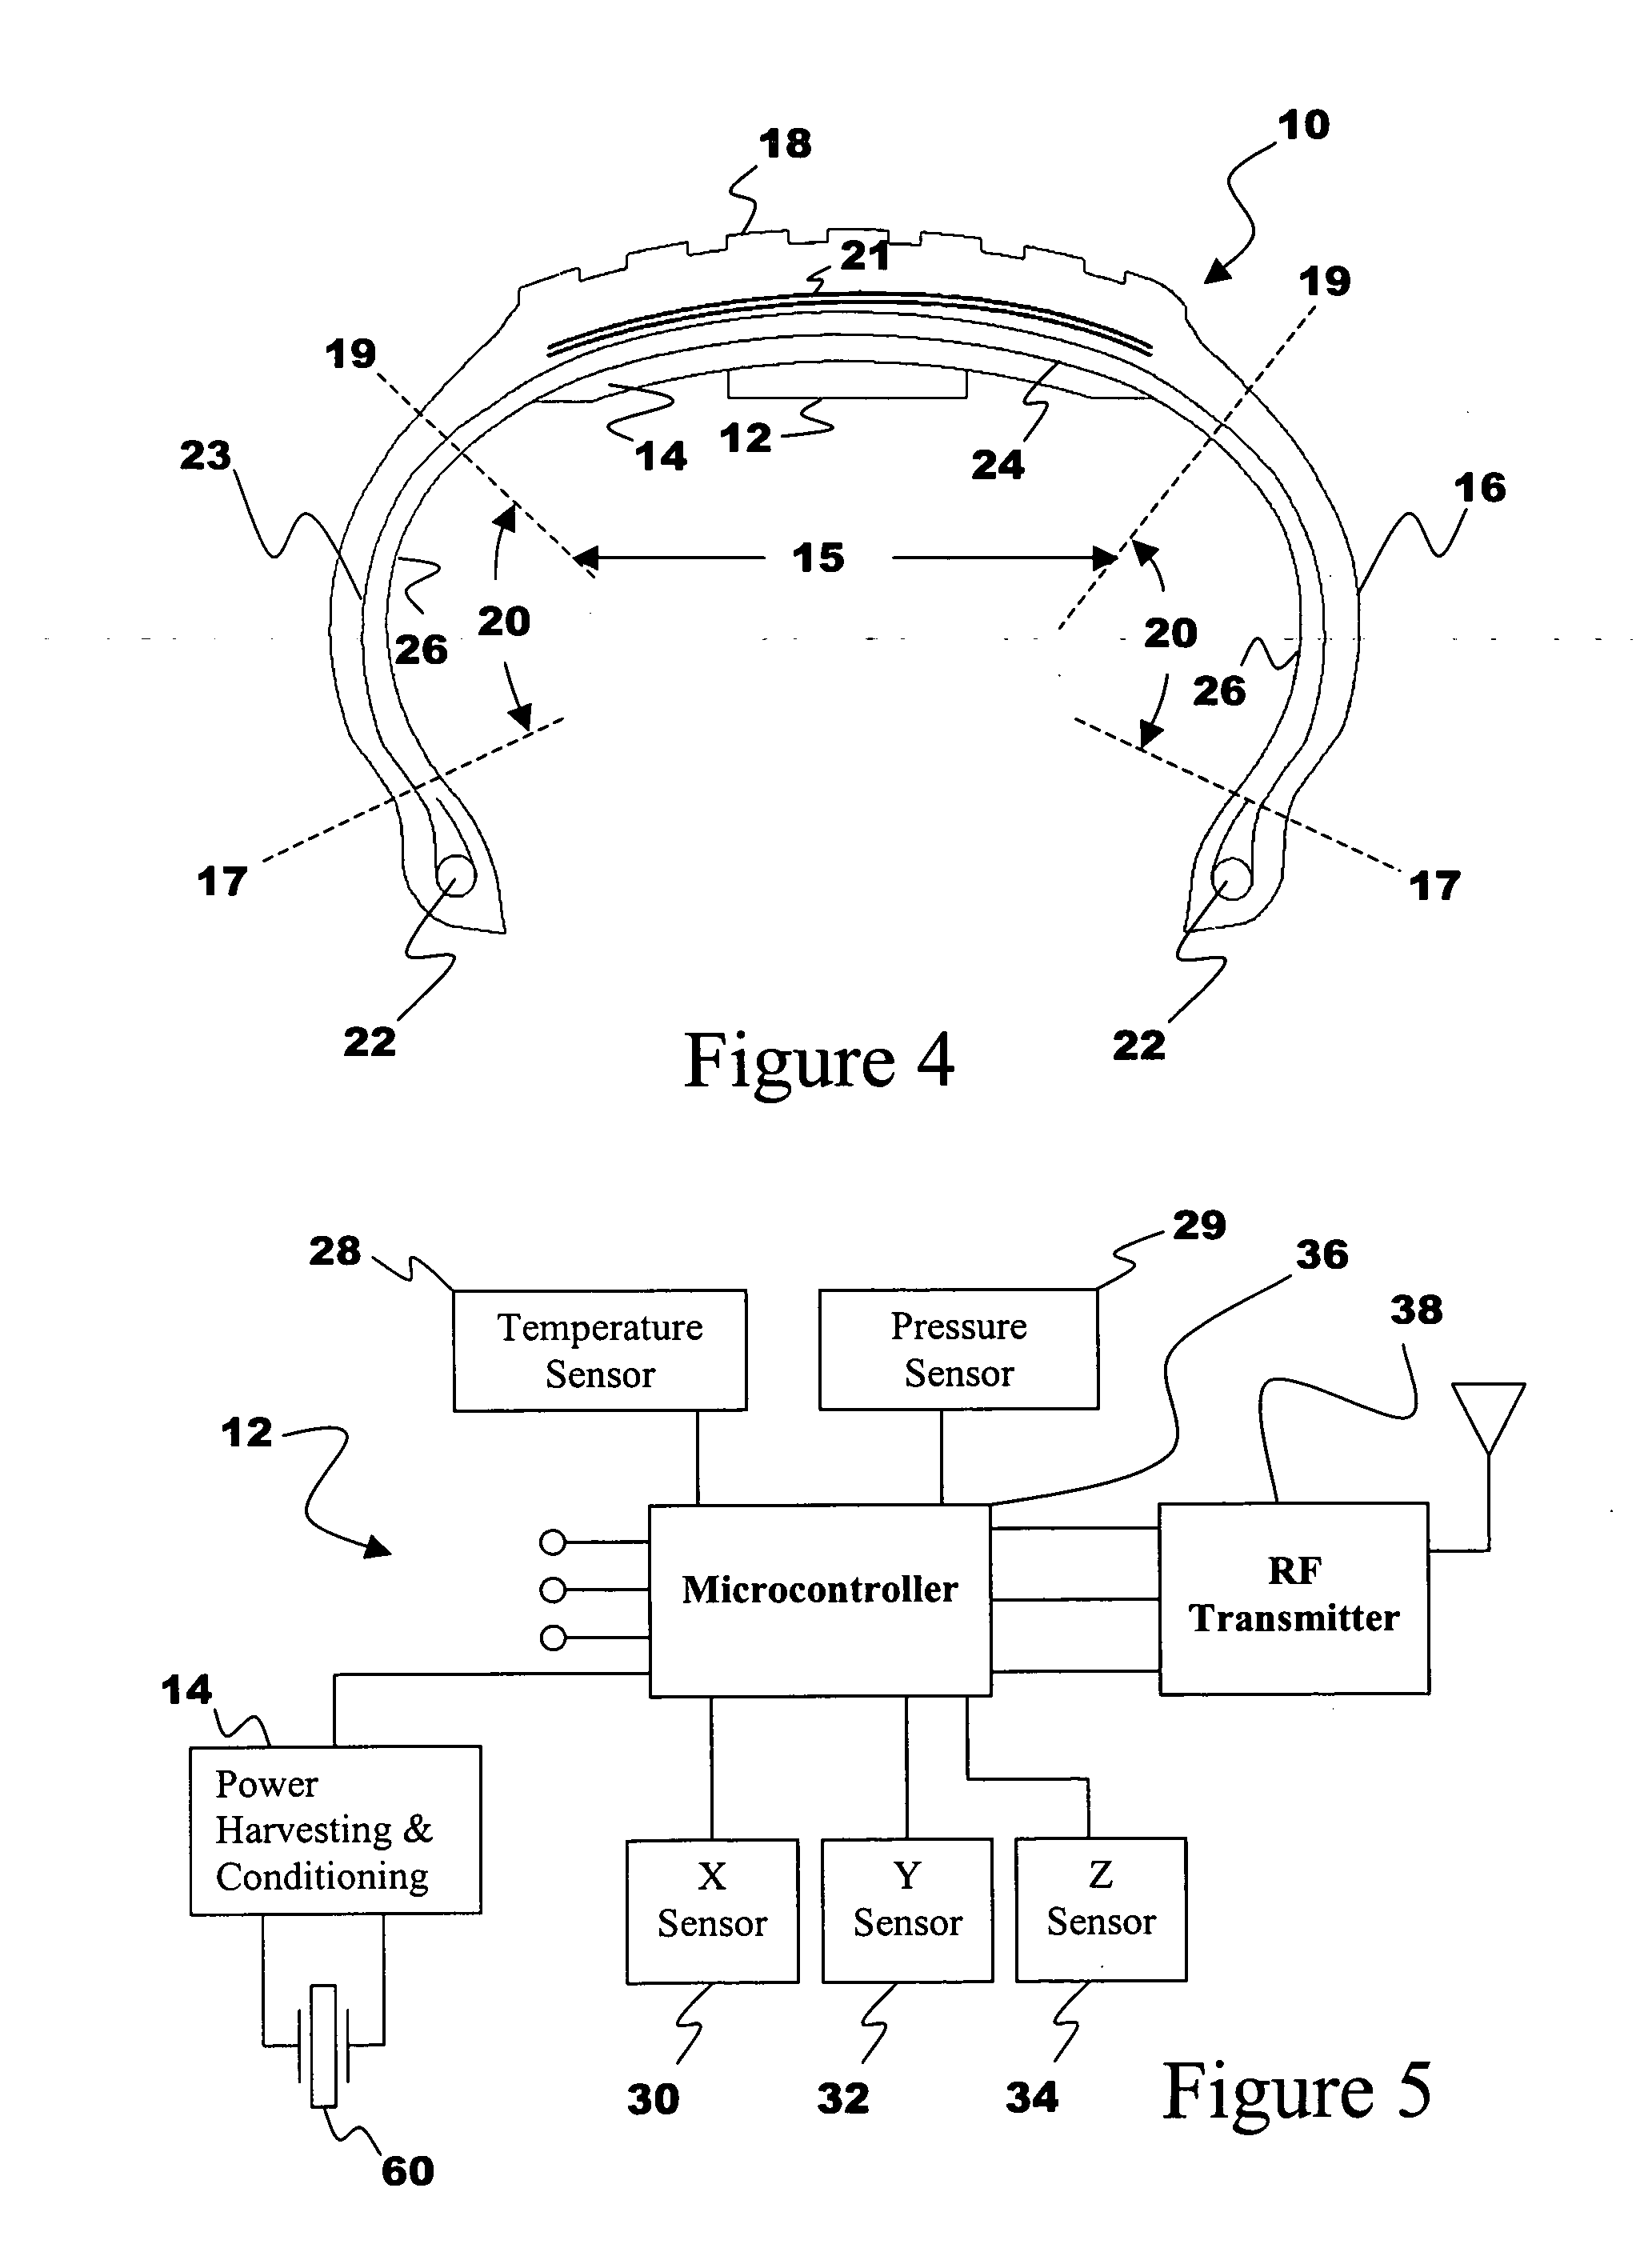 Power conversion from piezoelectric source